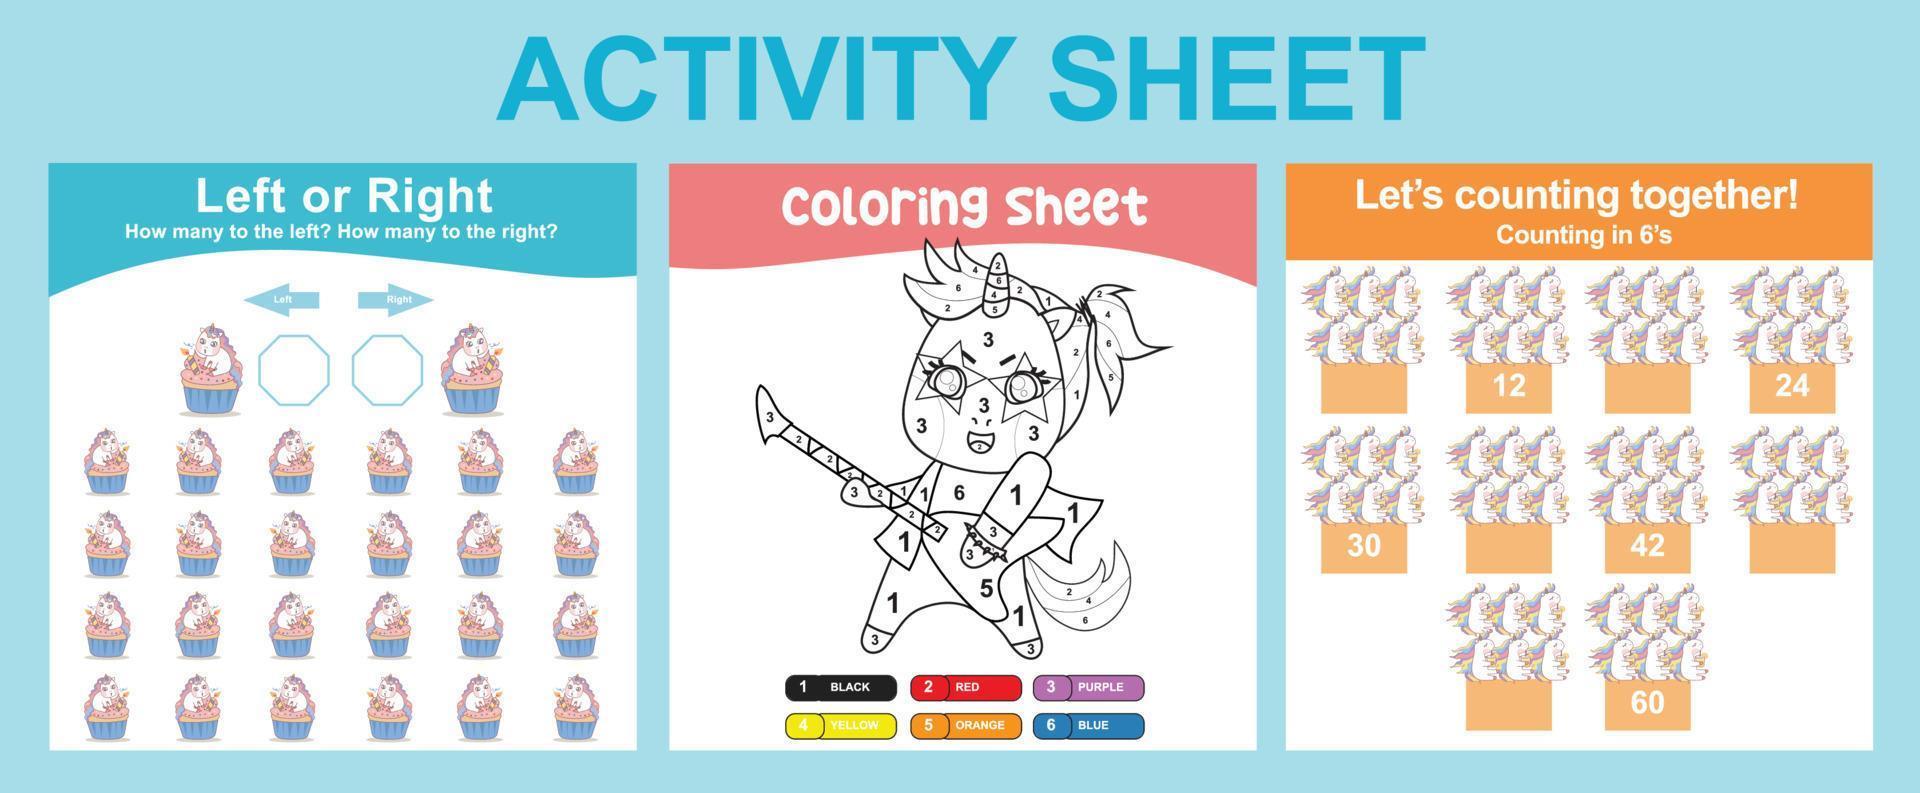 3 in 1 Activity Sheet for children. Educational printable worksheet for preschool. Coloring and counting activity. Vector illustrations.